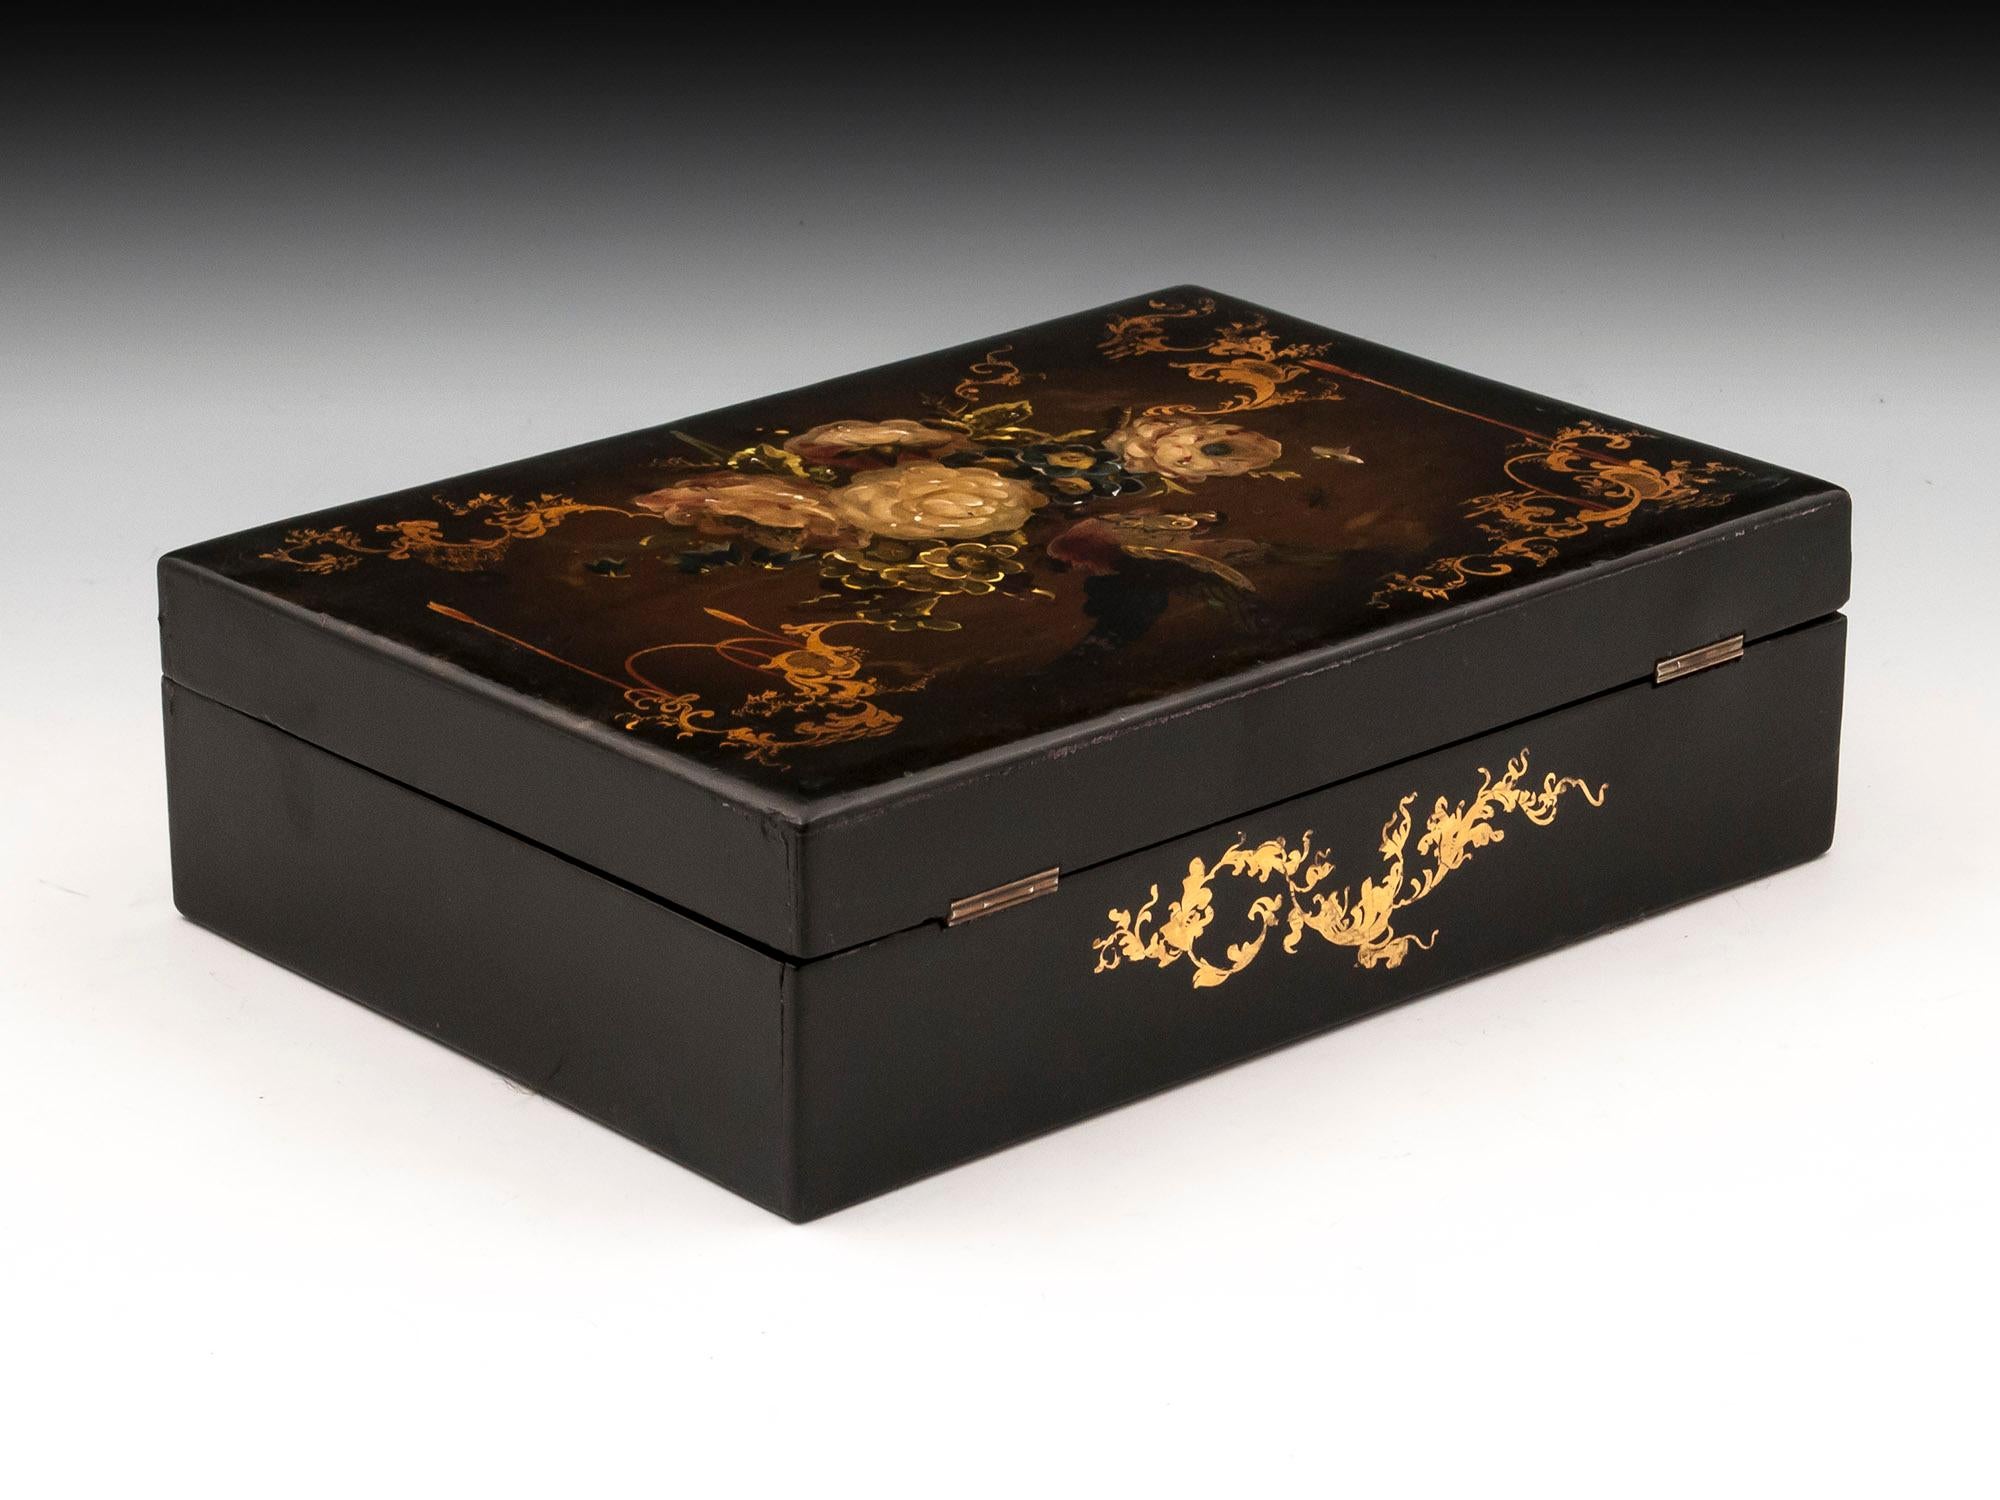 Papier Mâché Sewing Box Velvet Lined Mother-of-Pearl, 19th Century In Good Condition For Sale In Northampton, United Kingdom